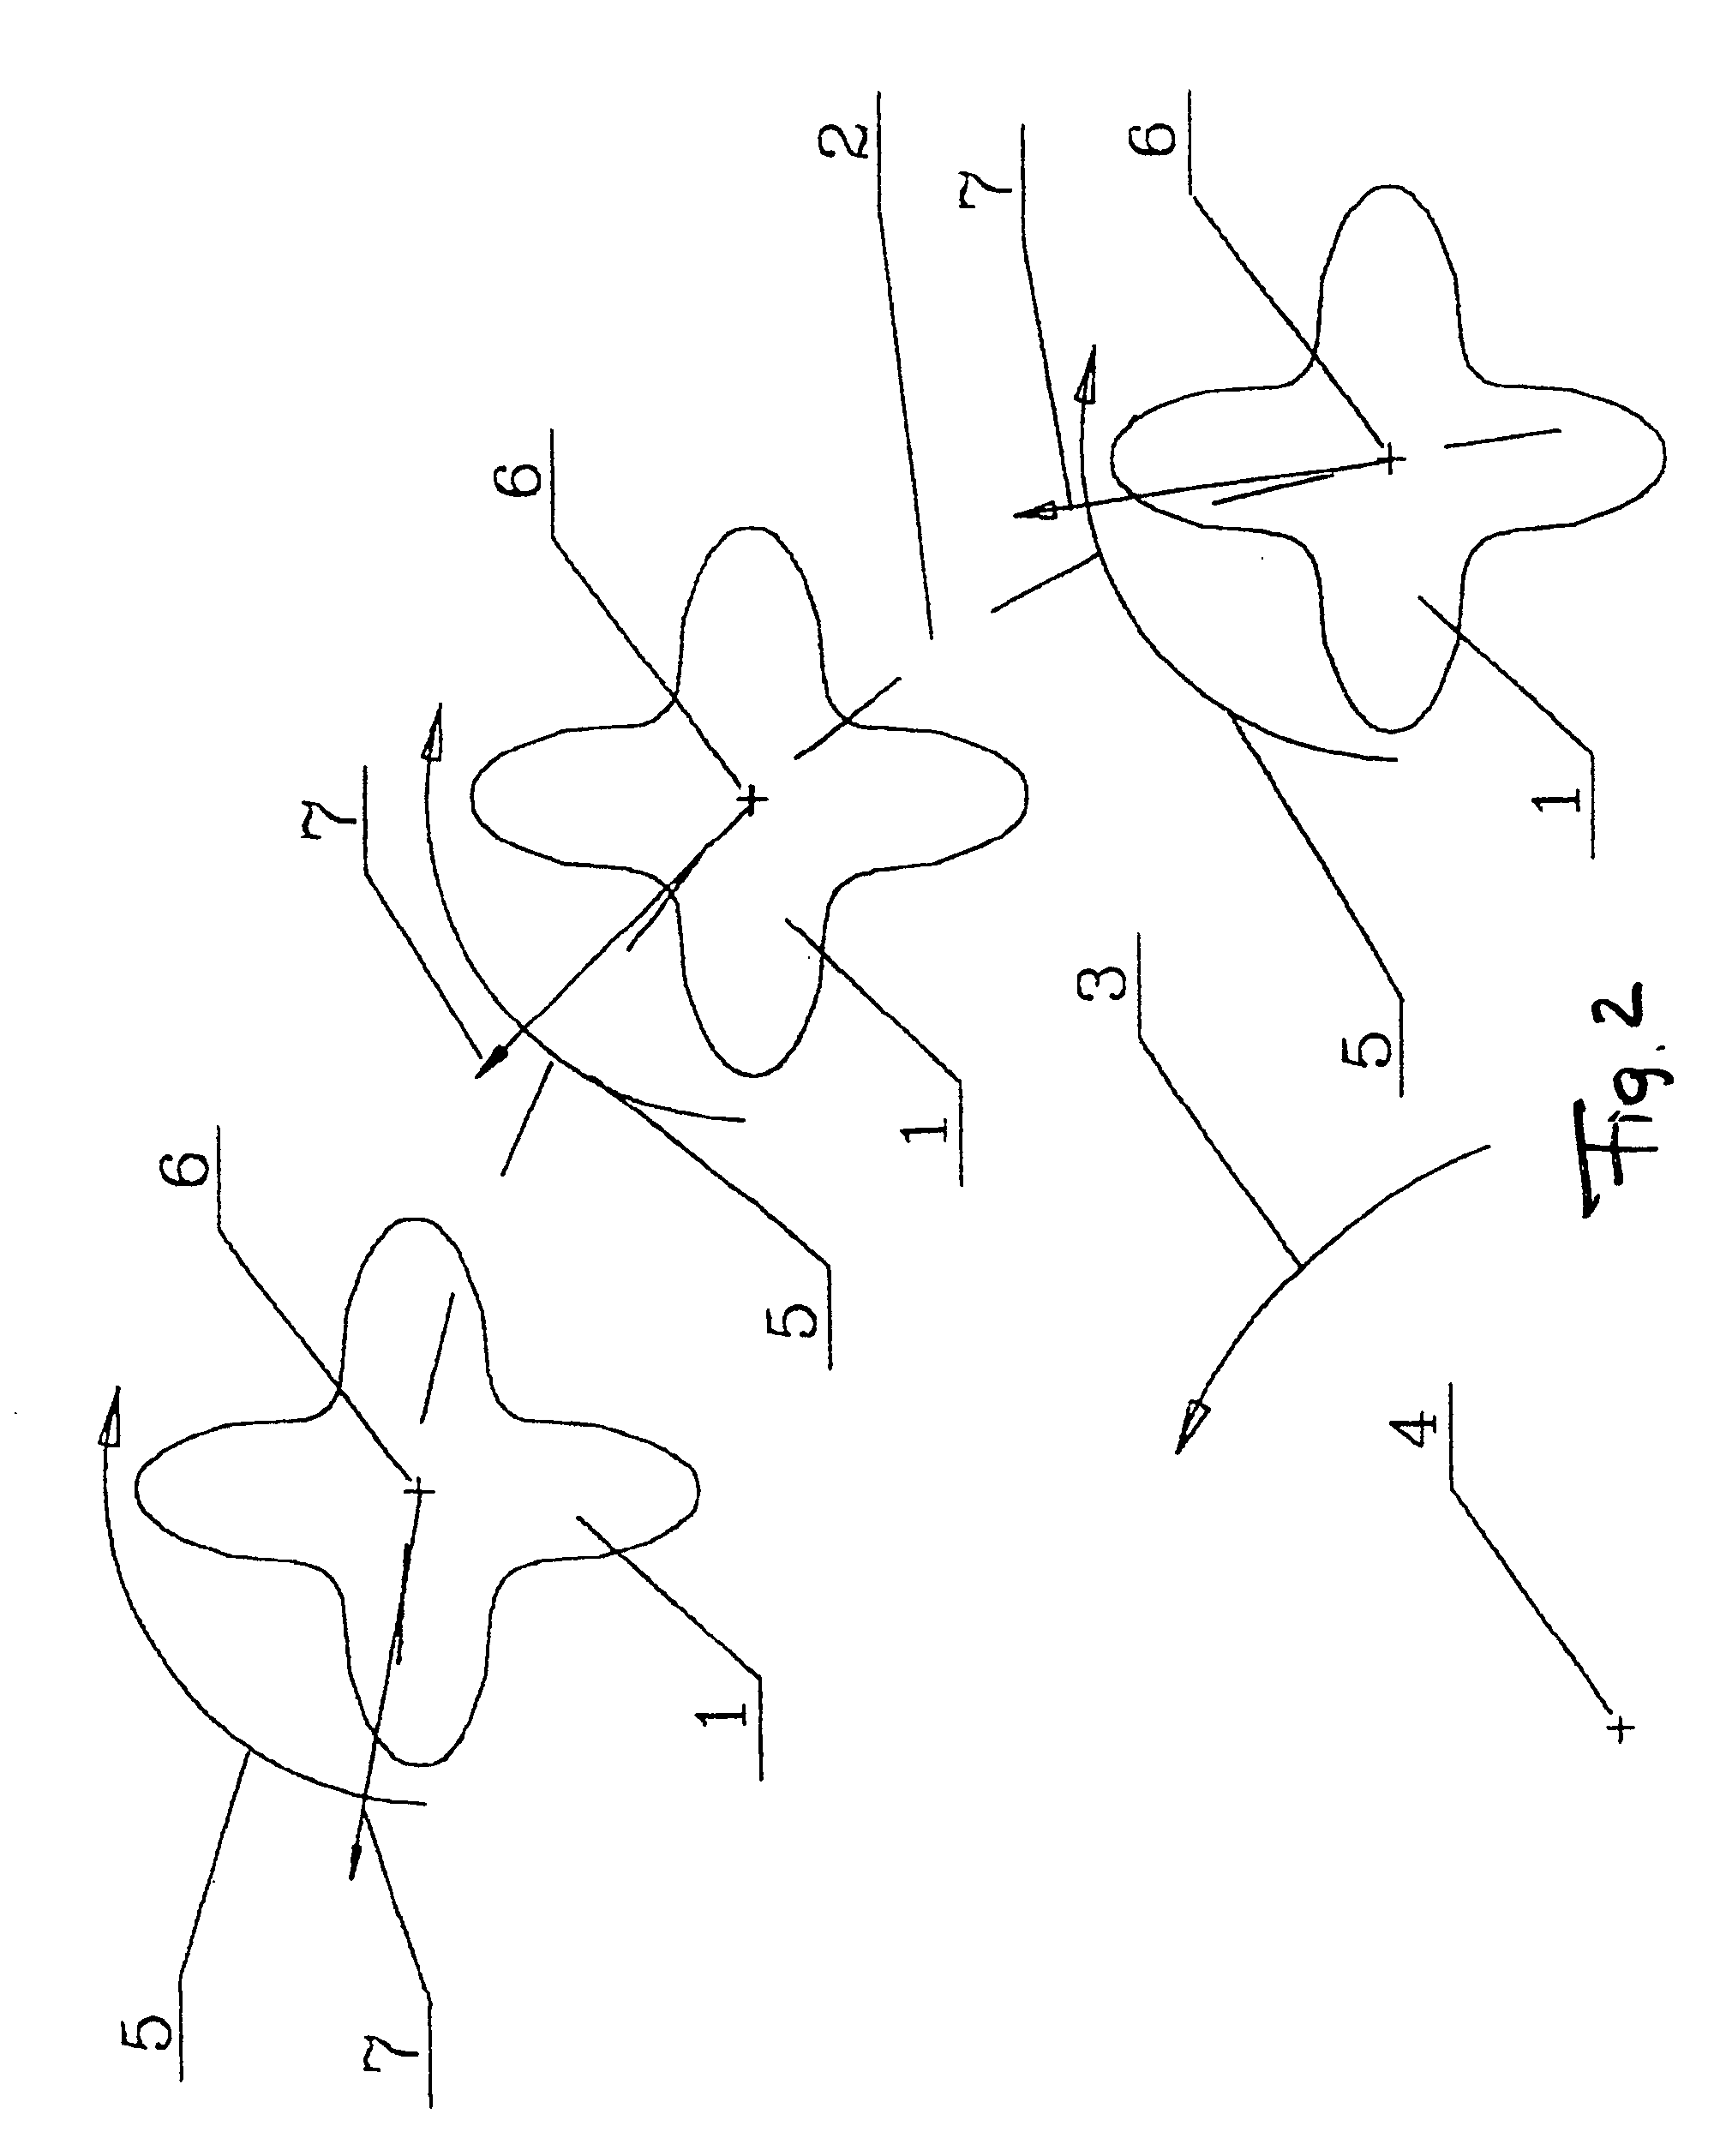 Method for producing a lift and a horizontal thrust